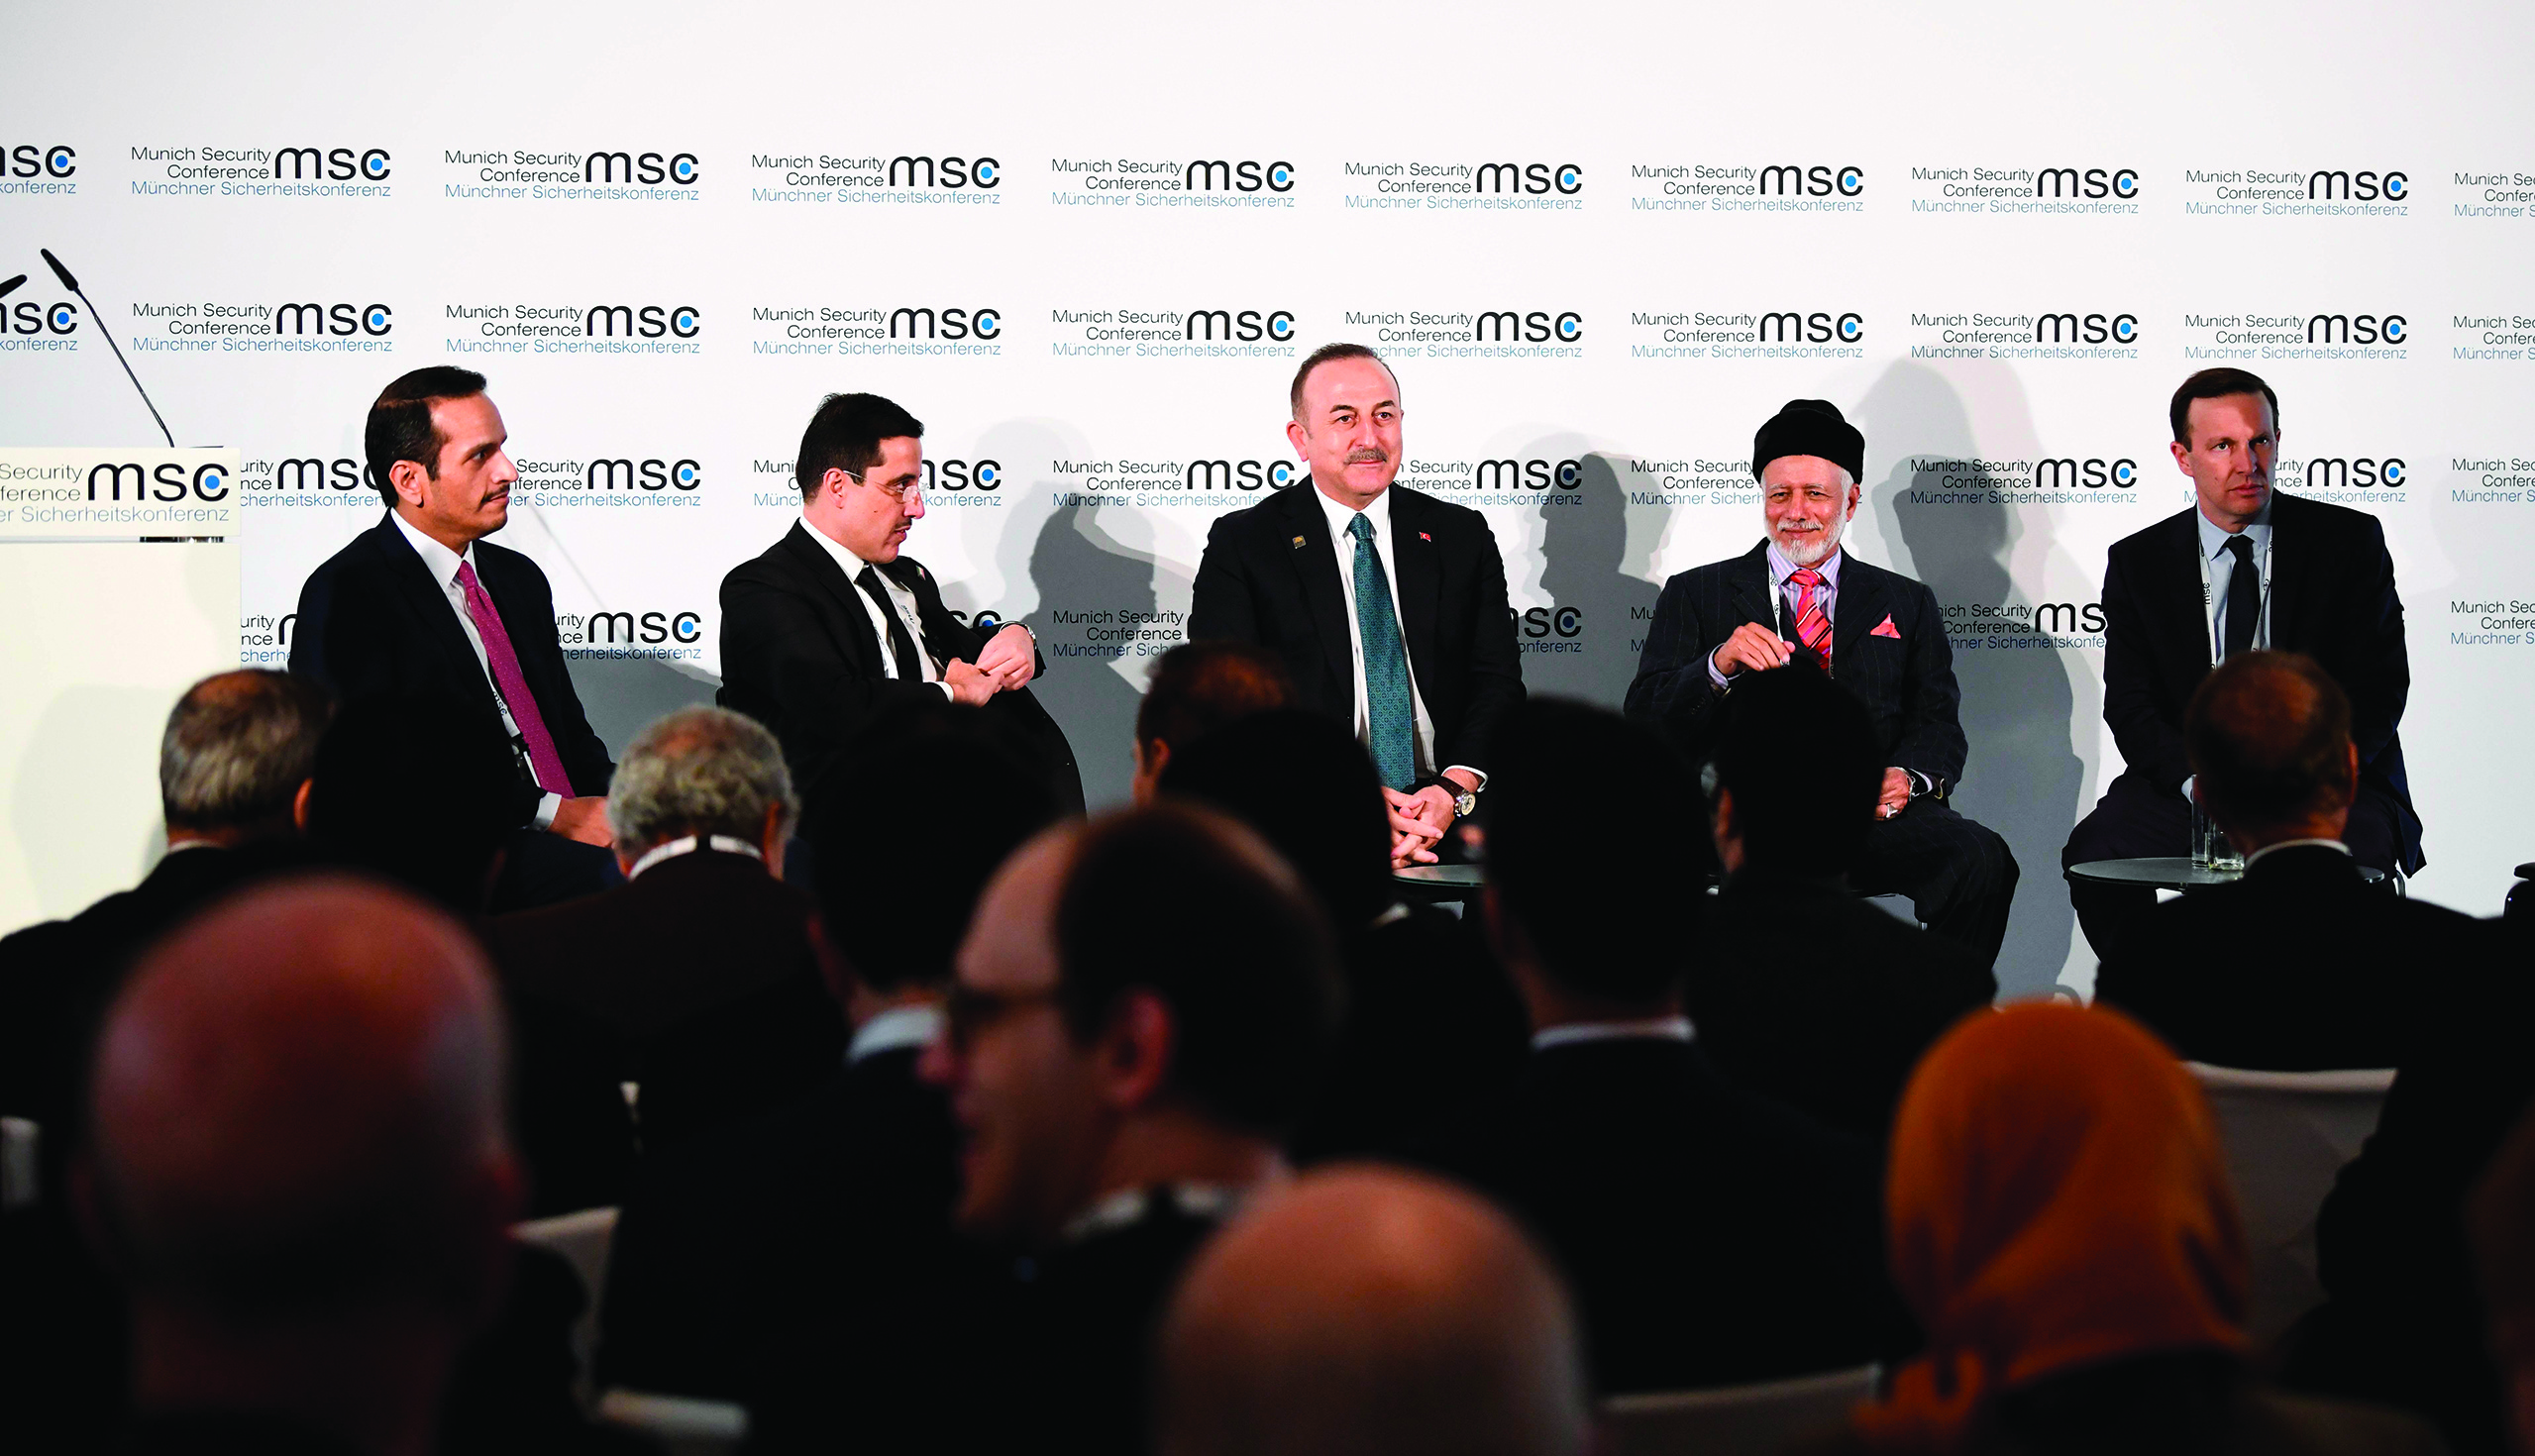 (L-R) Qatar's Foreign Minister Sheikh Mohammed bin Abdulrahman Al Thani, Kuwait's Foreign Minister Sheikh Ahmad Nasser Al-Mohammad Al-Sabah, Turkish Foreign Minister Mevlut Cavusoglu, Oman's Foreign Minister Yusuf bin Alawi bin Abdullah and US Senator Chris Murphy attend a panel discussion during the 56th Munich Security Conference (MSC) in Munich, southern Germany, on February 15, 2020. - The 2020 edition of the Munich Security Conference (MSC) takes place from February 14 to 16, 2020. (Photo by THOMAS KIENZLE / AFP)